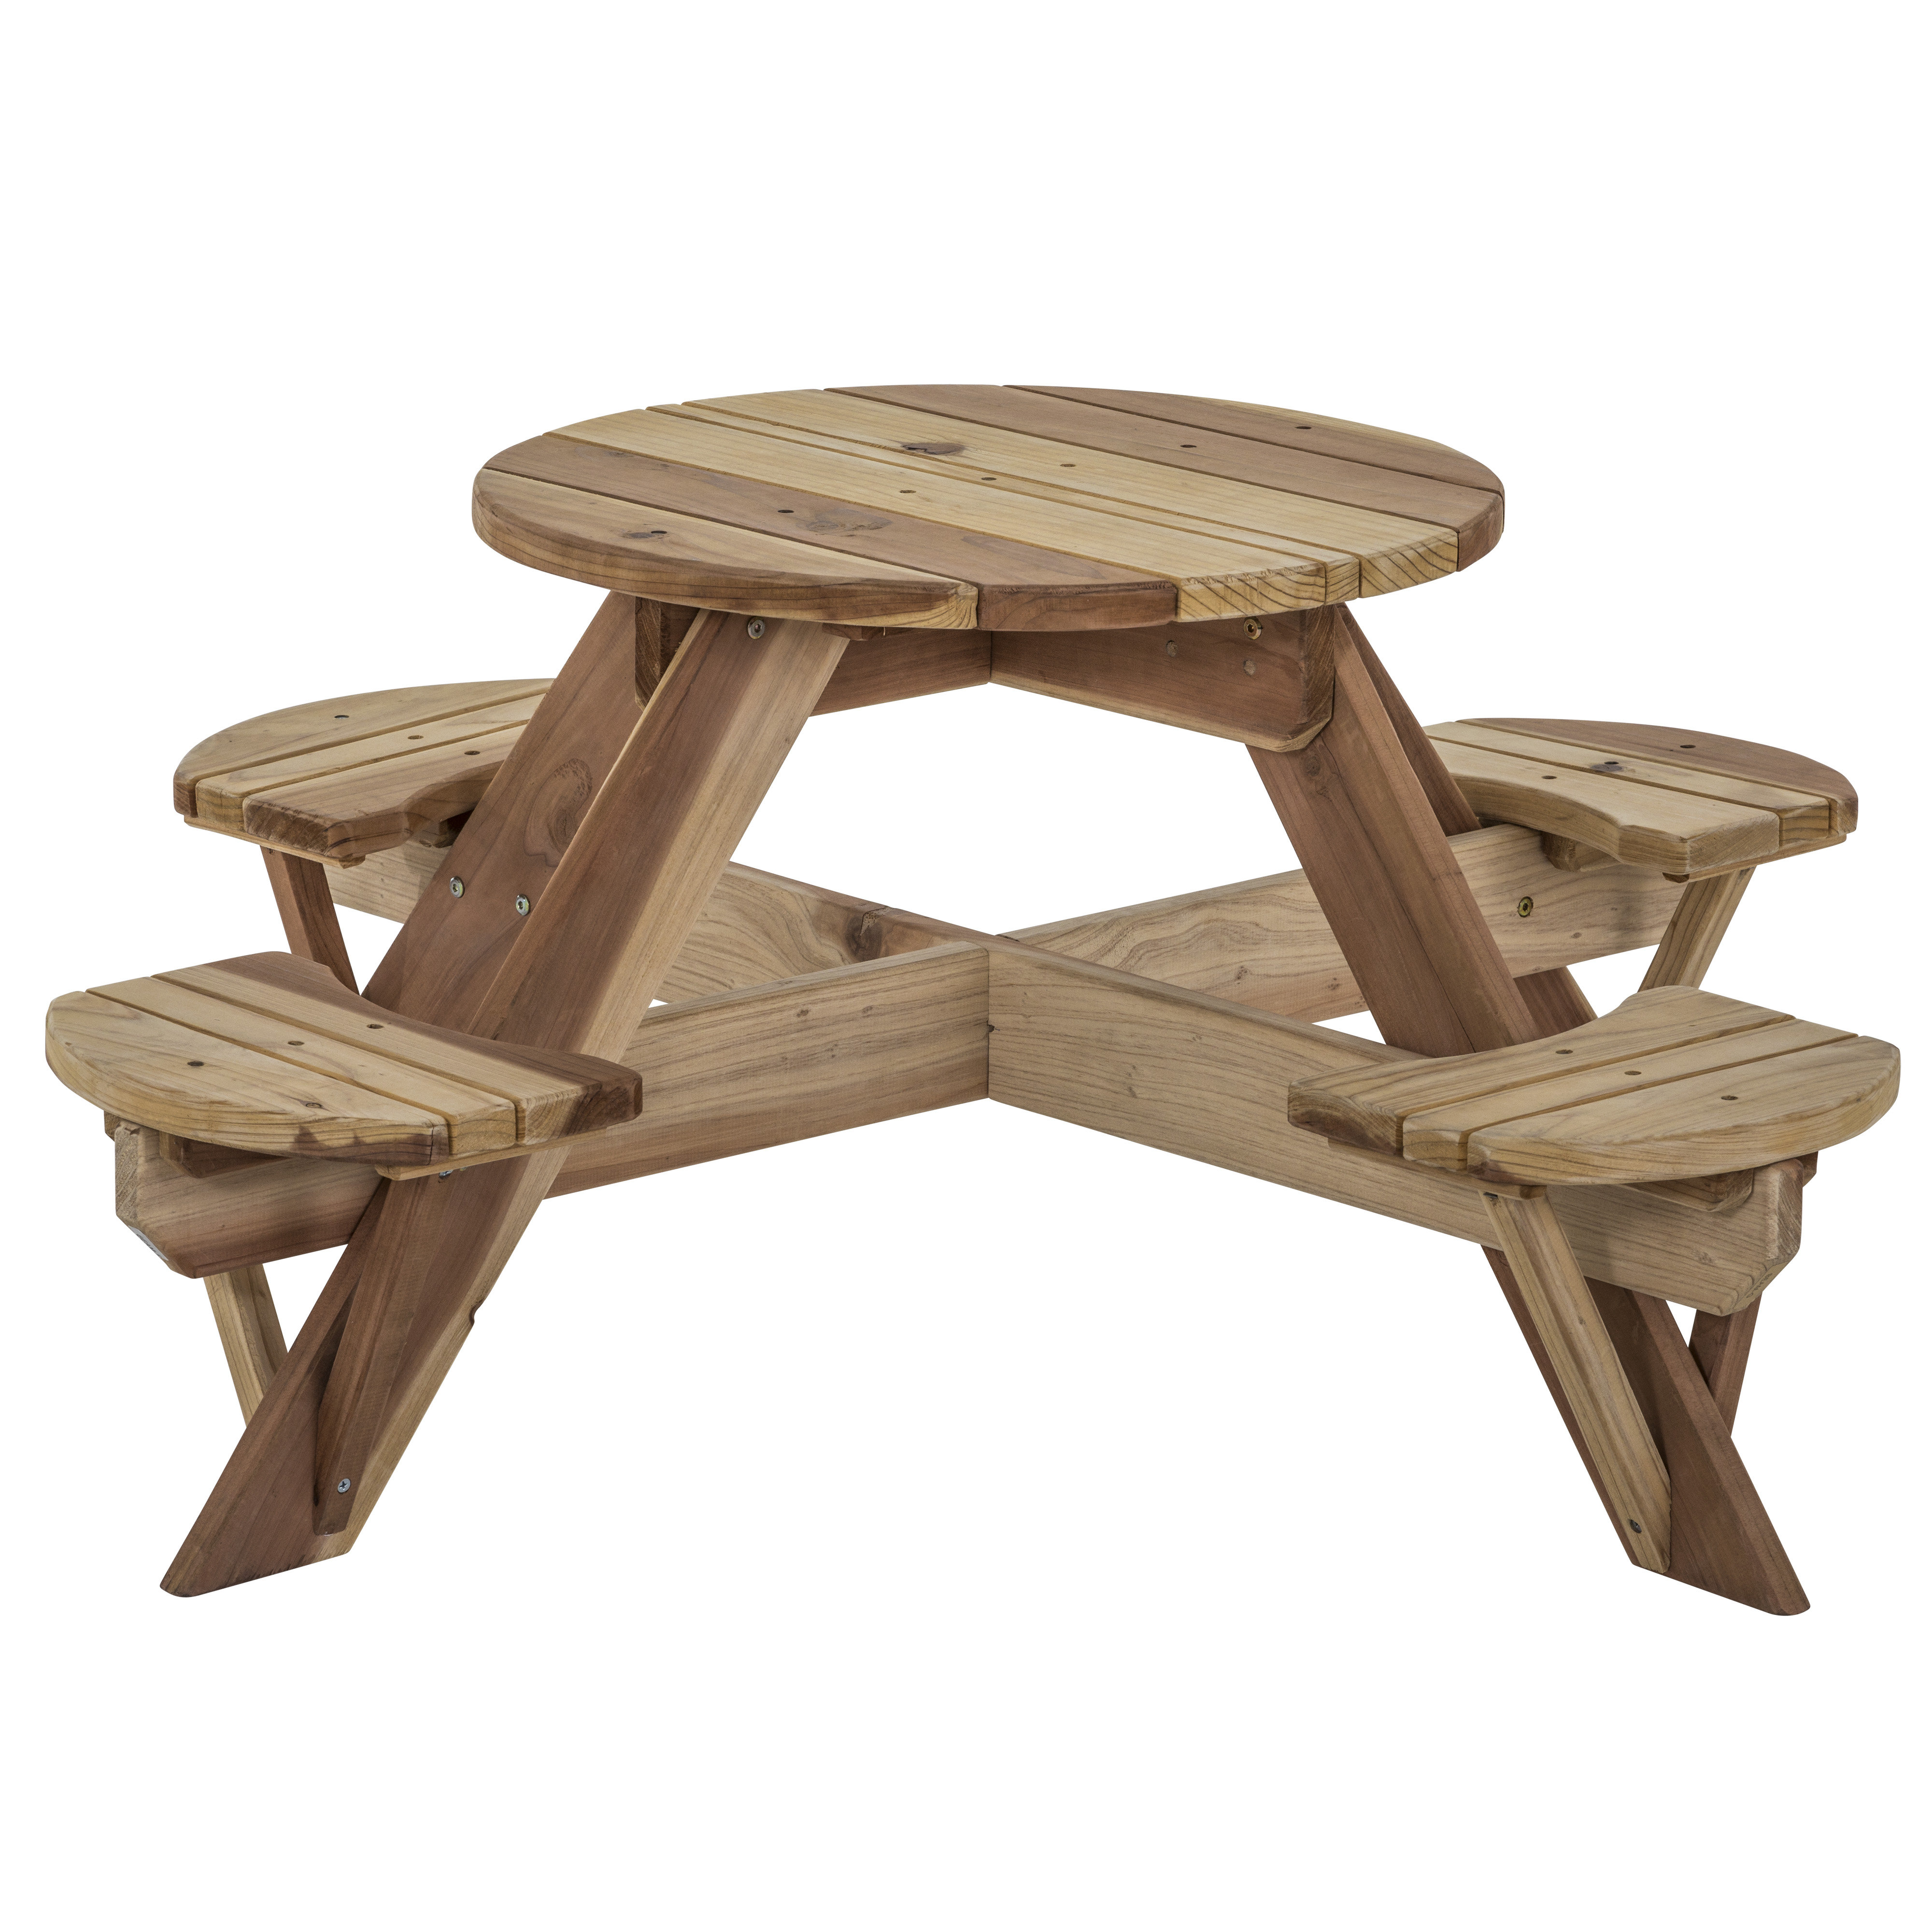 childrens outdoor table and chairs